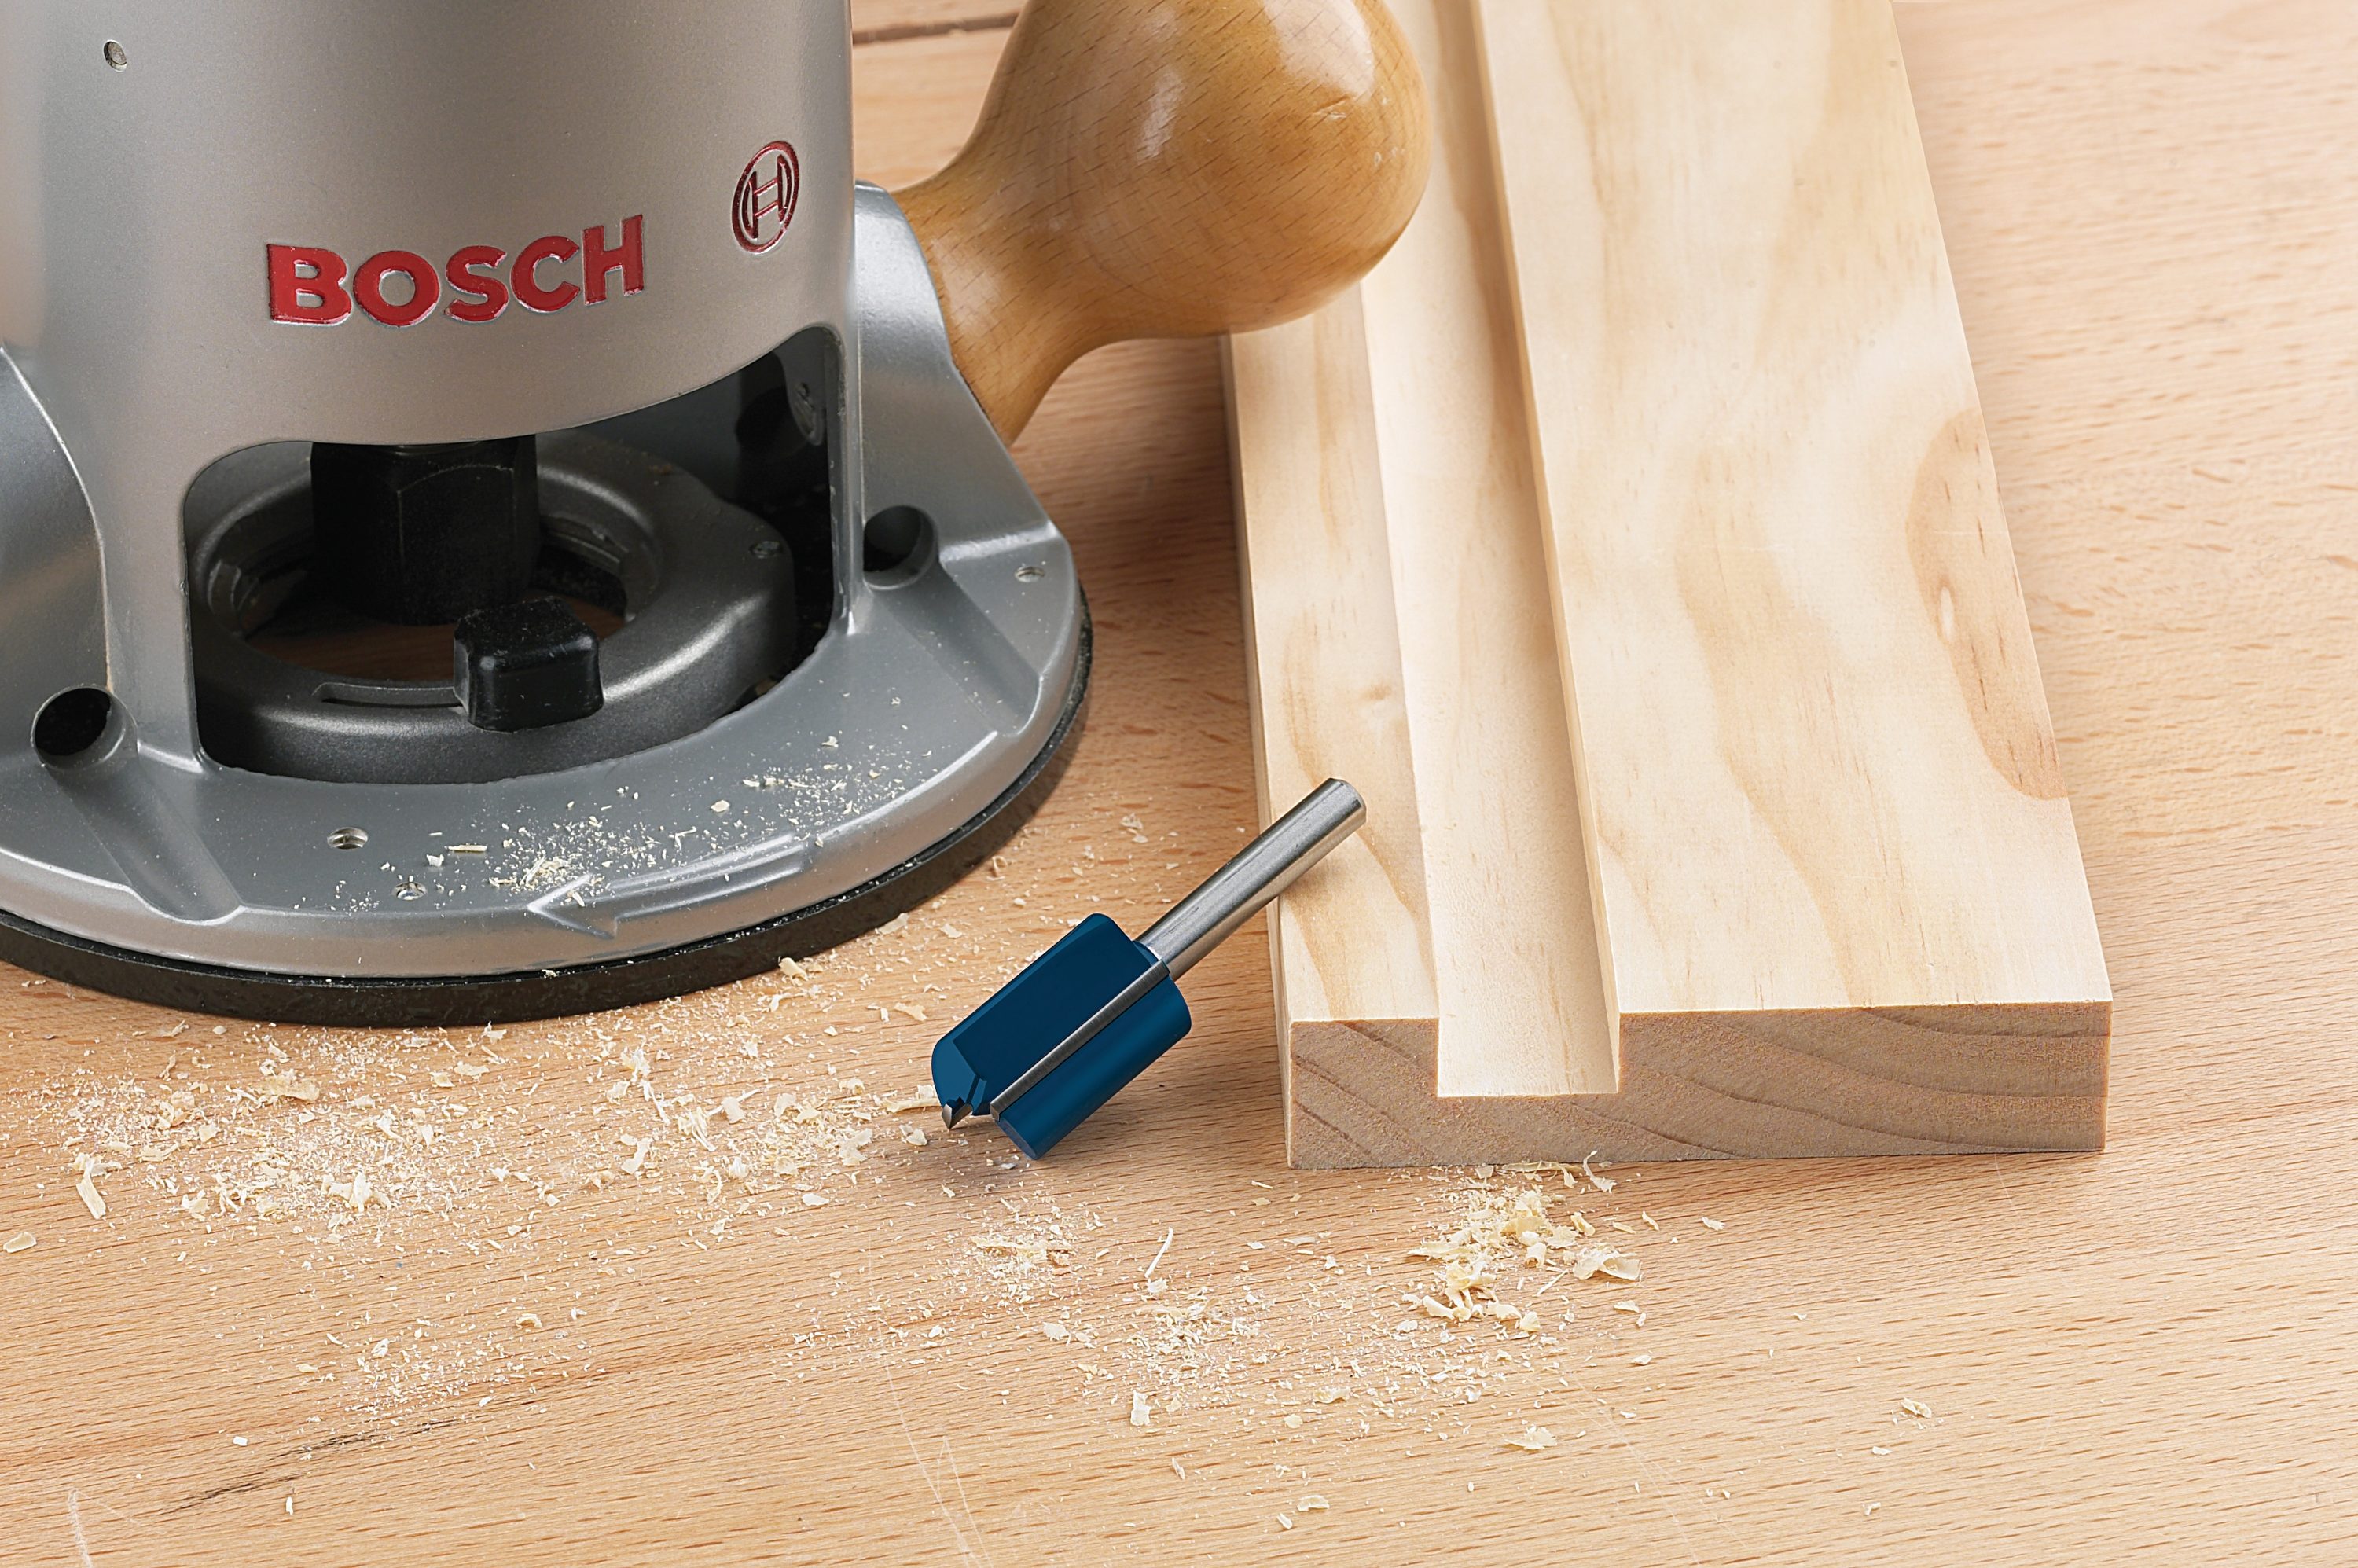 Bosch 1/16-in Solid Carbide Straight Router Bit at Lowes.com